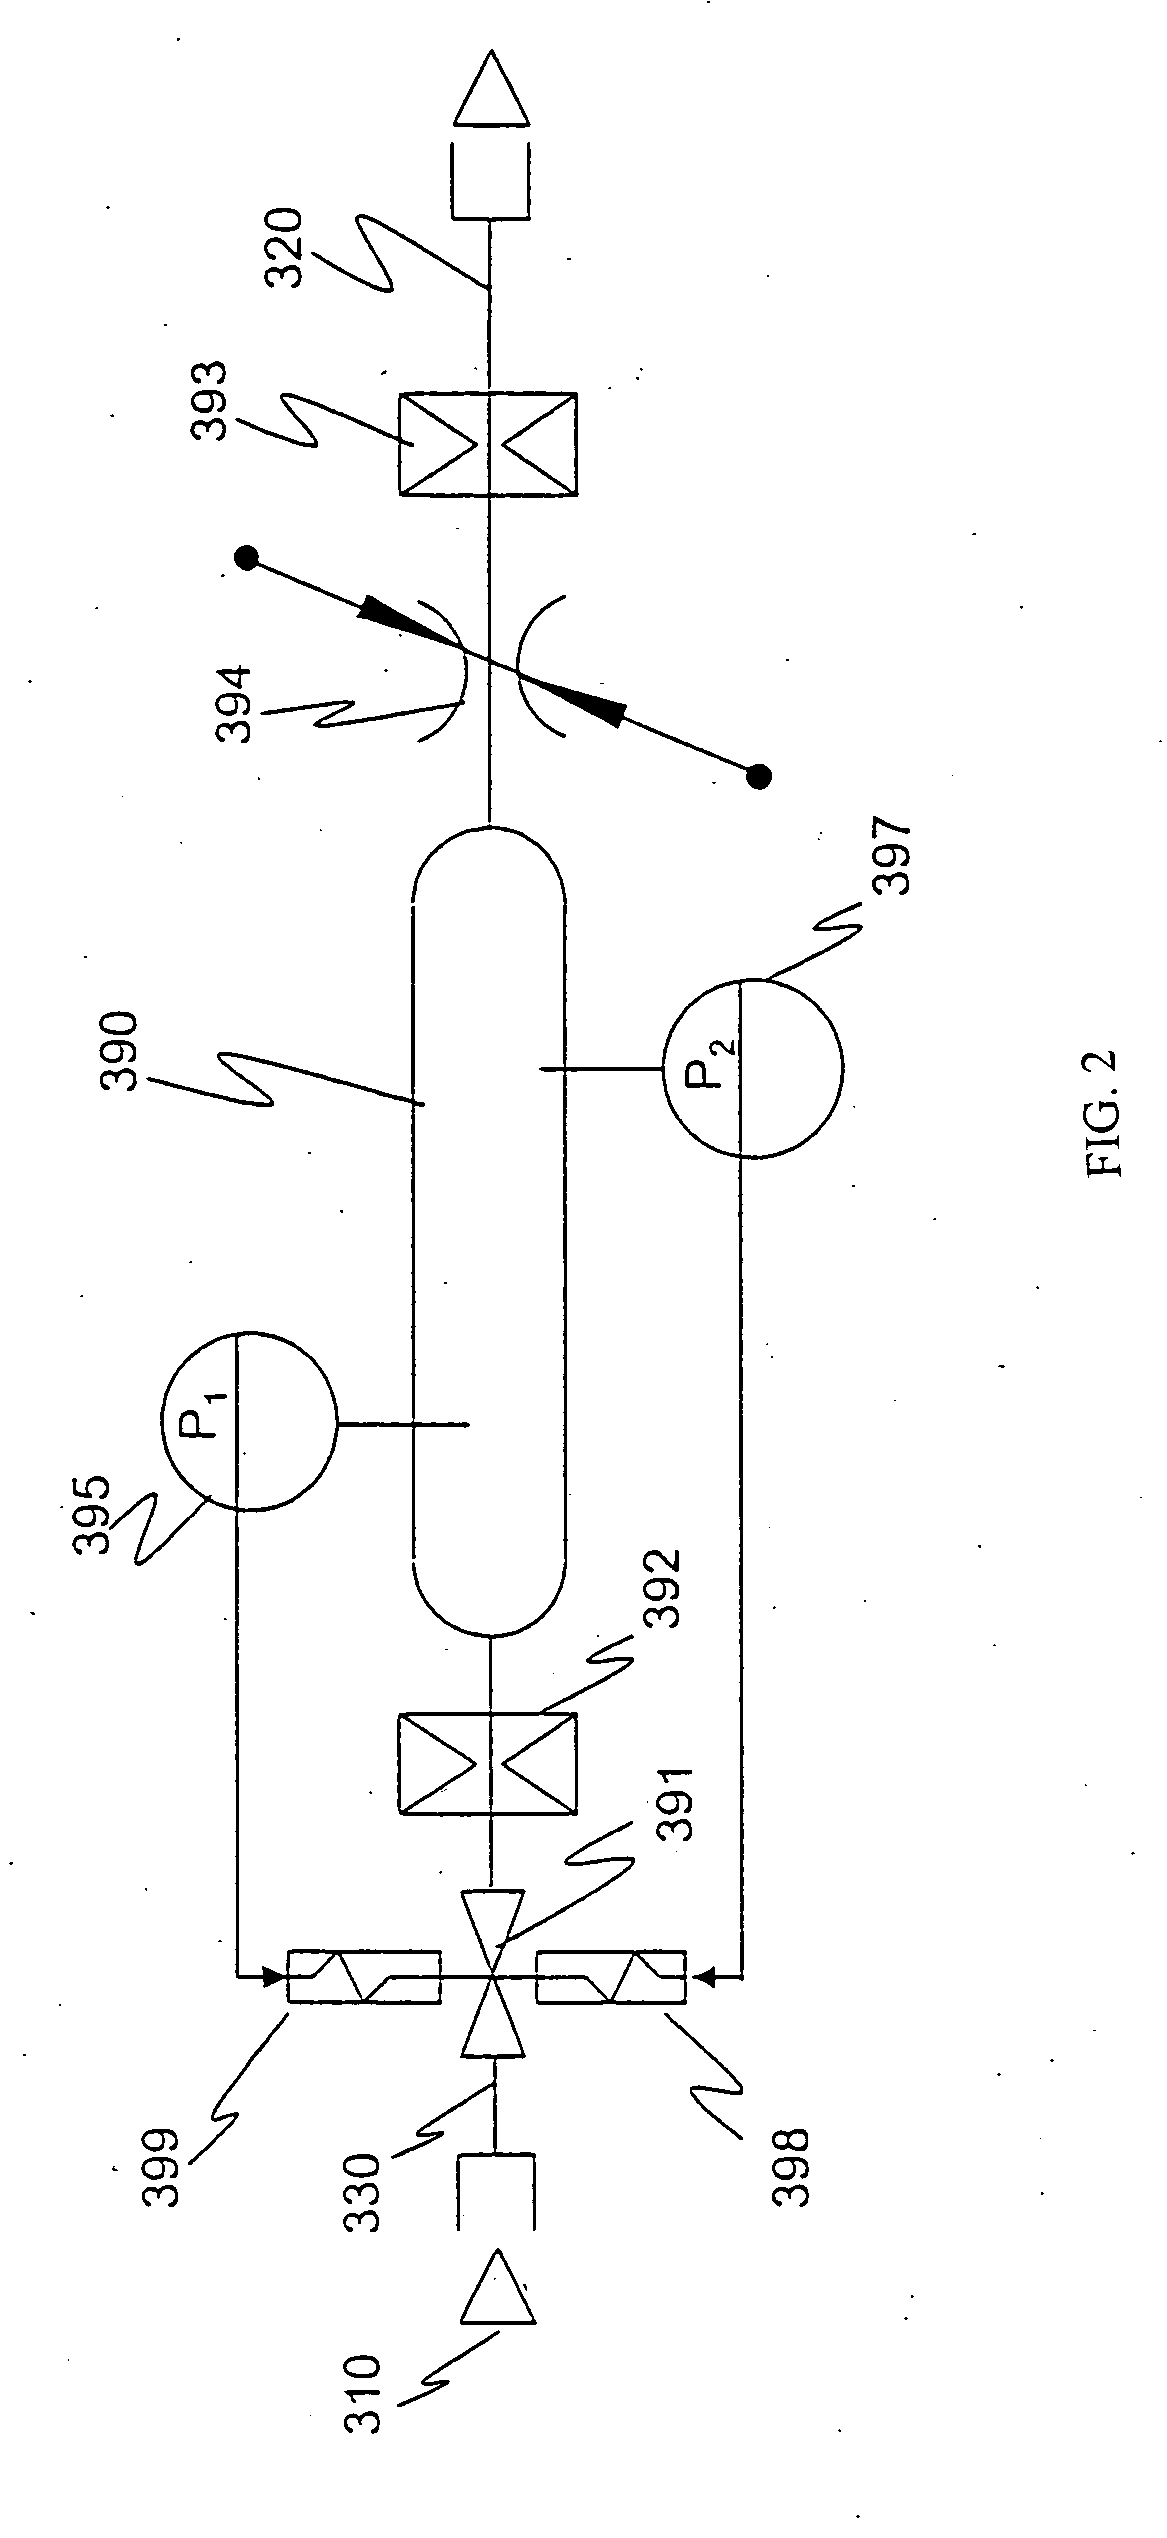 Alkaline electrolyte fuel cells with improved hydrogen-oxygen supply system